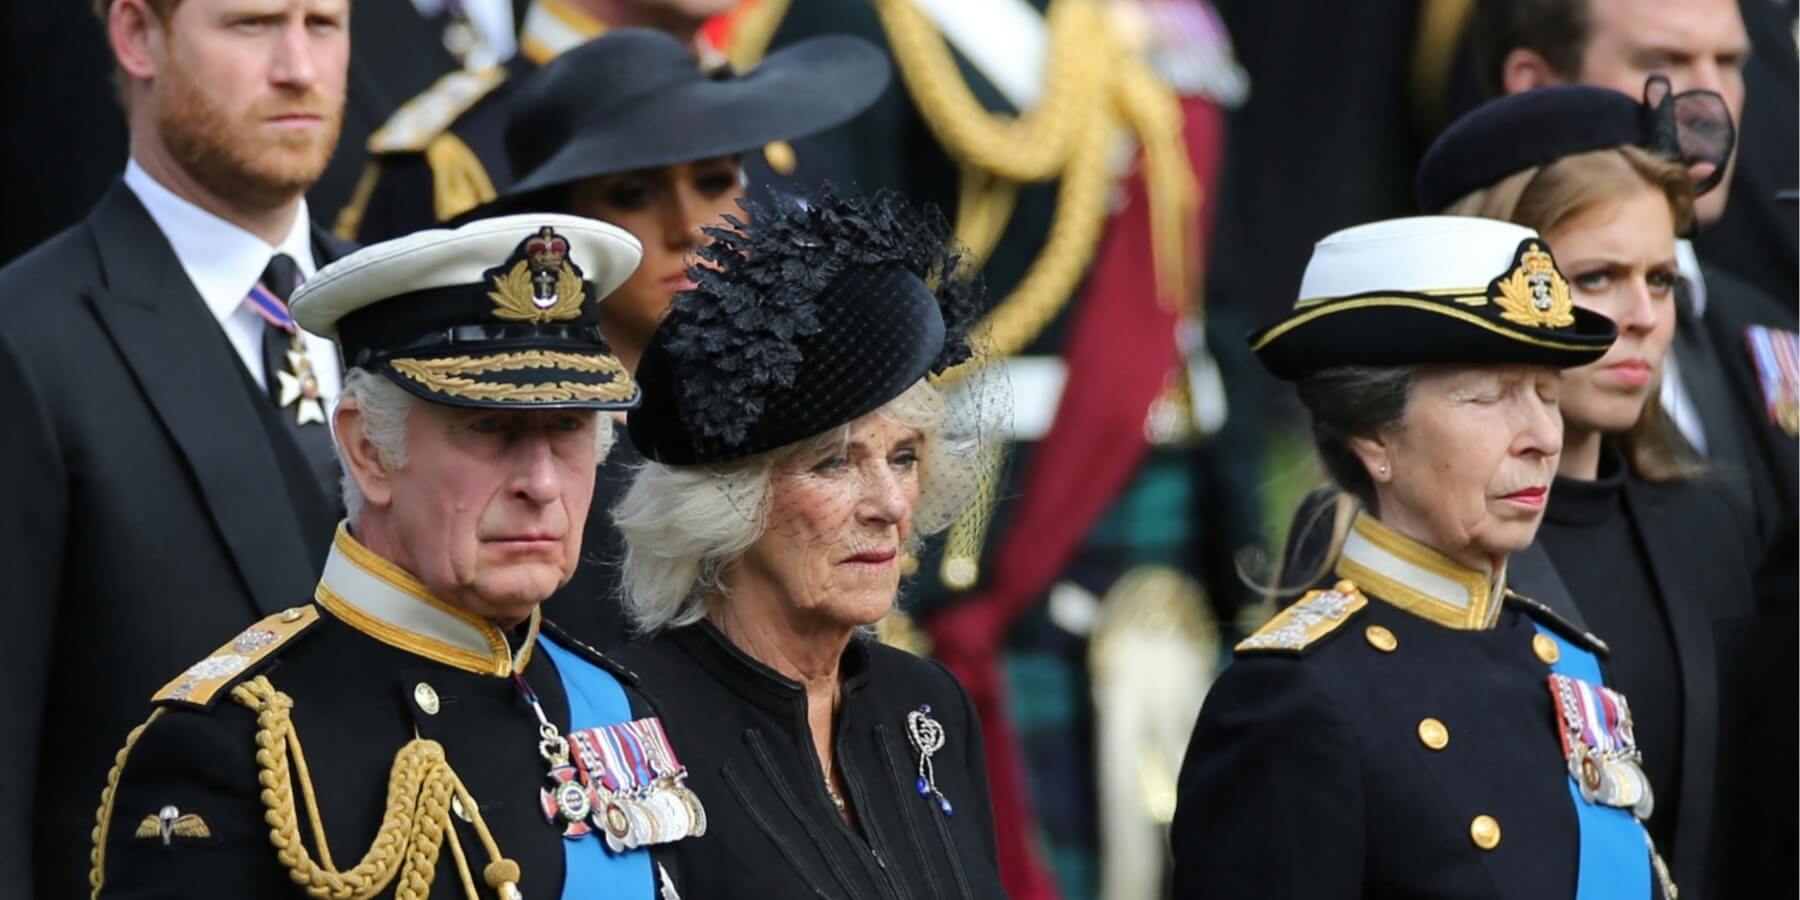 Prince Harry, King Charles, Camilla Parker Bowles, Princess Anne, and Princess Beatrice